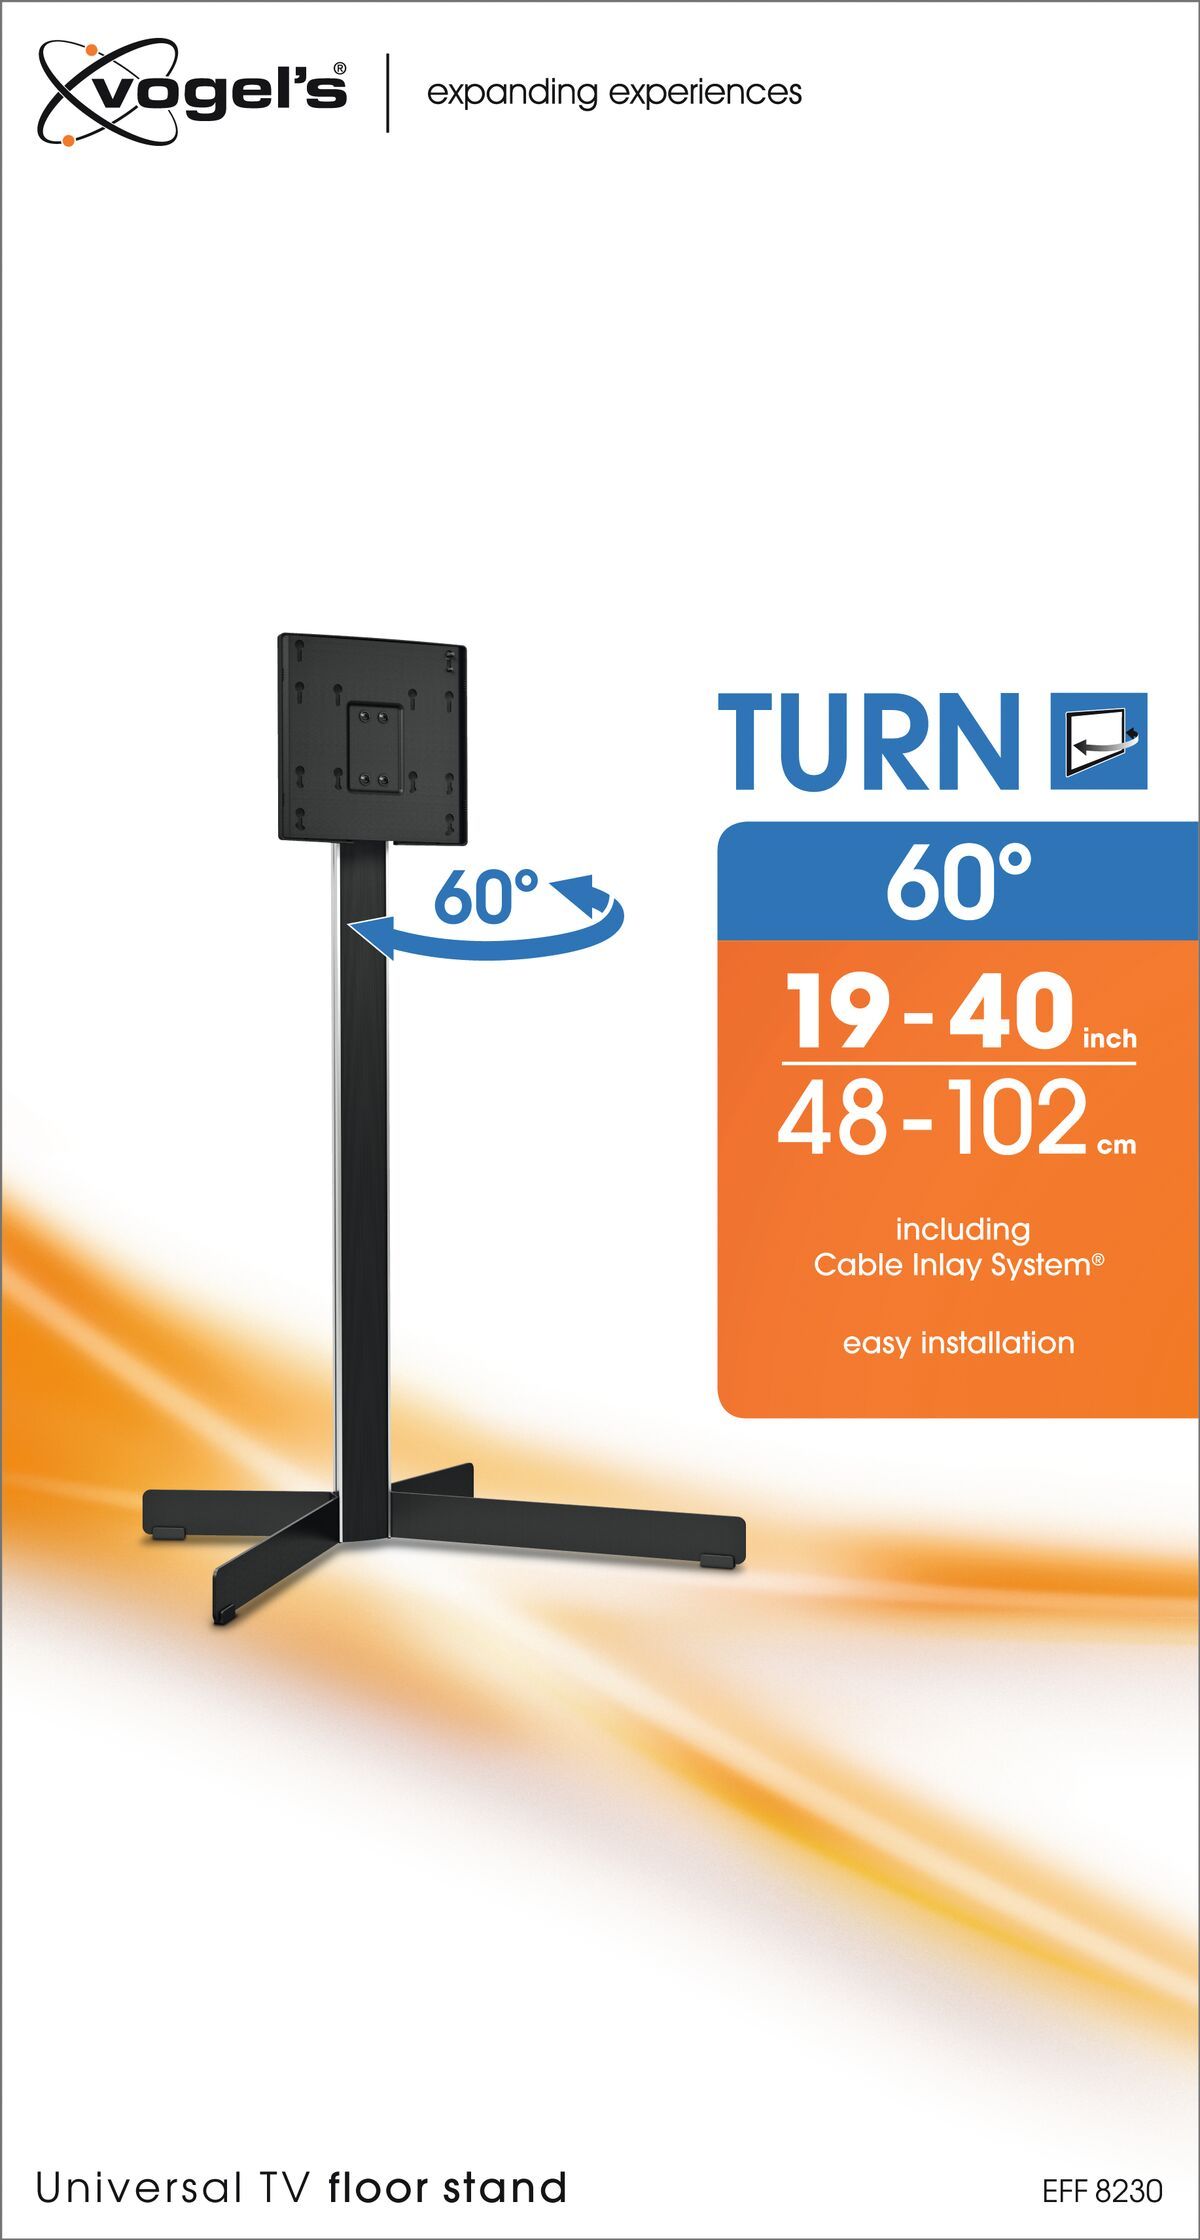 Vogel's EFF 8230 TV Floor Stand - Suitable for 19 up to 40 inch TVs up to 30 kg - Packaging front